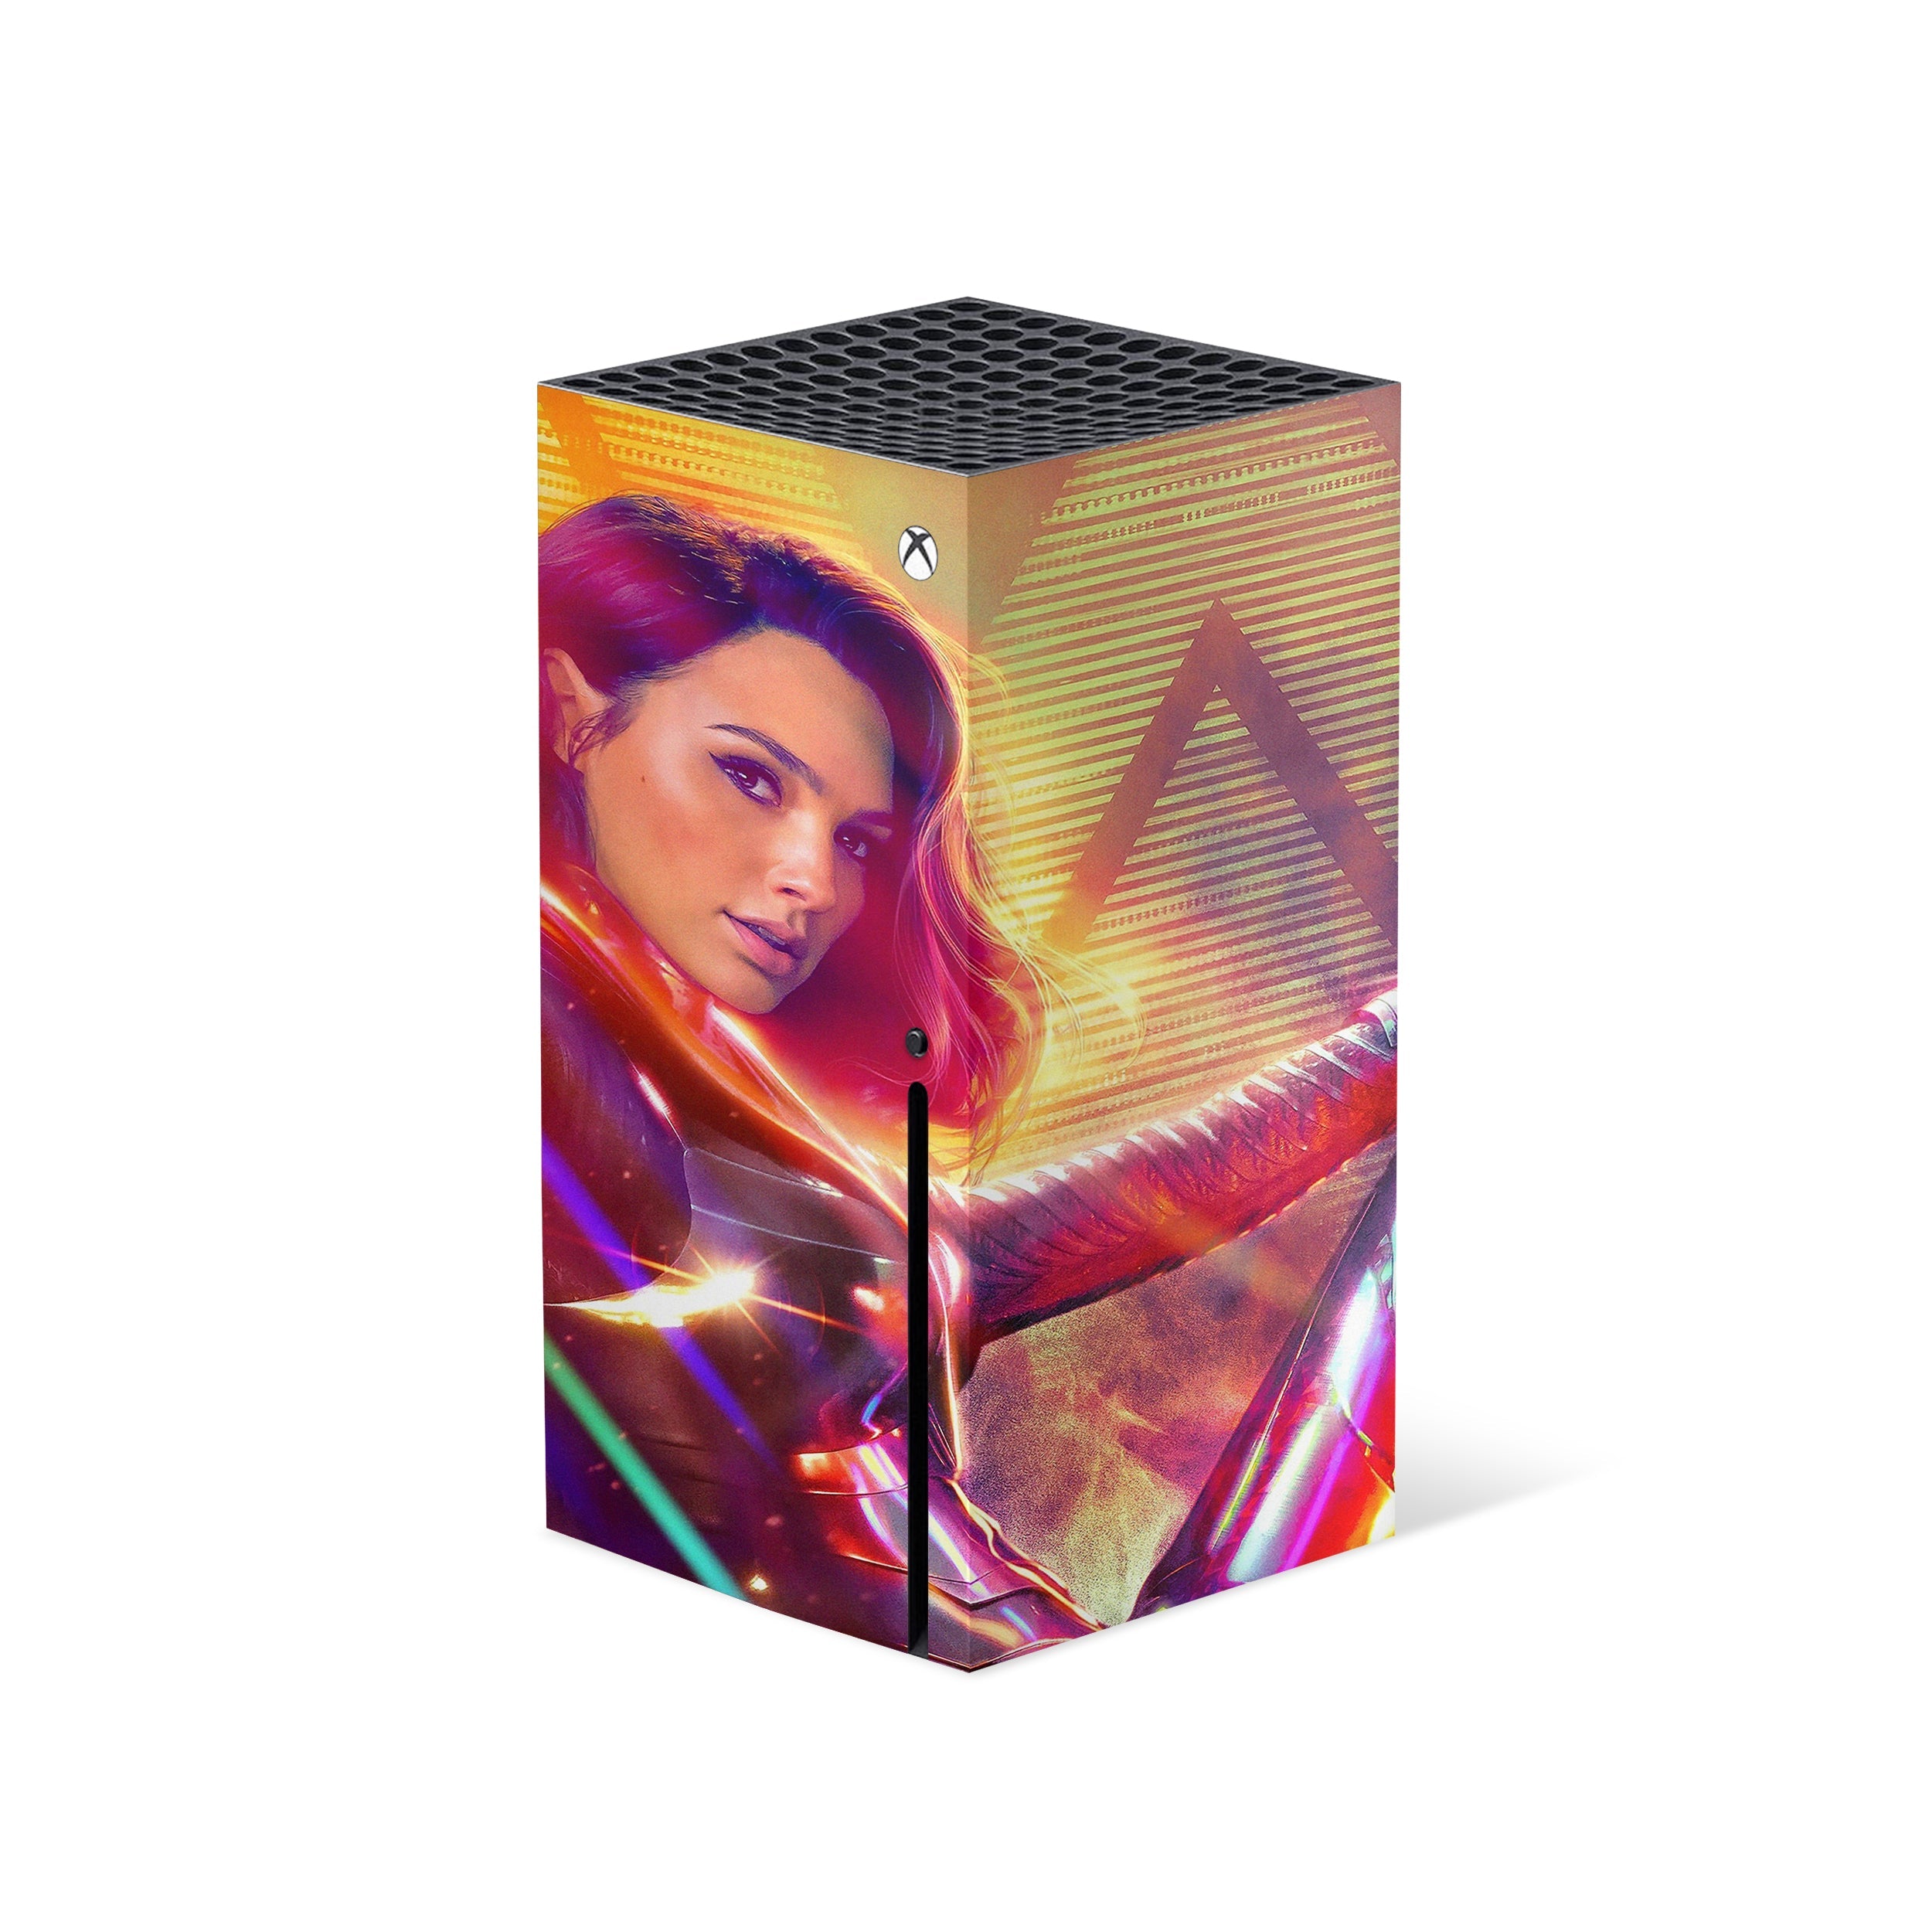 A video game skin featuring a DC Comics Wonder Woman design for the Xbox Series X.